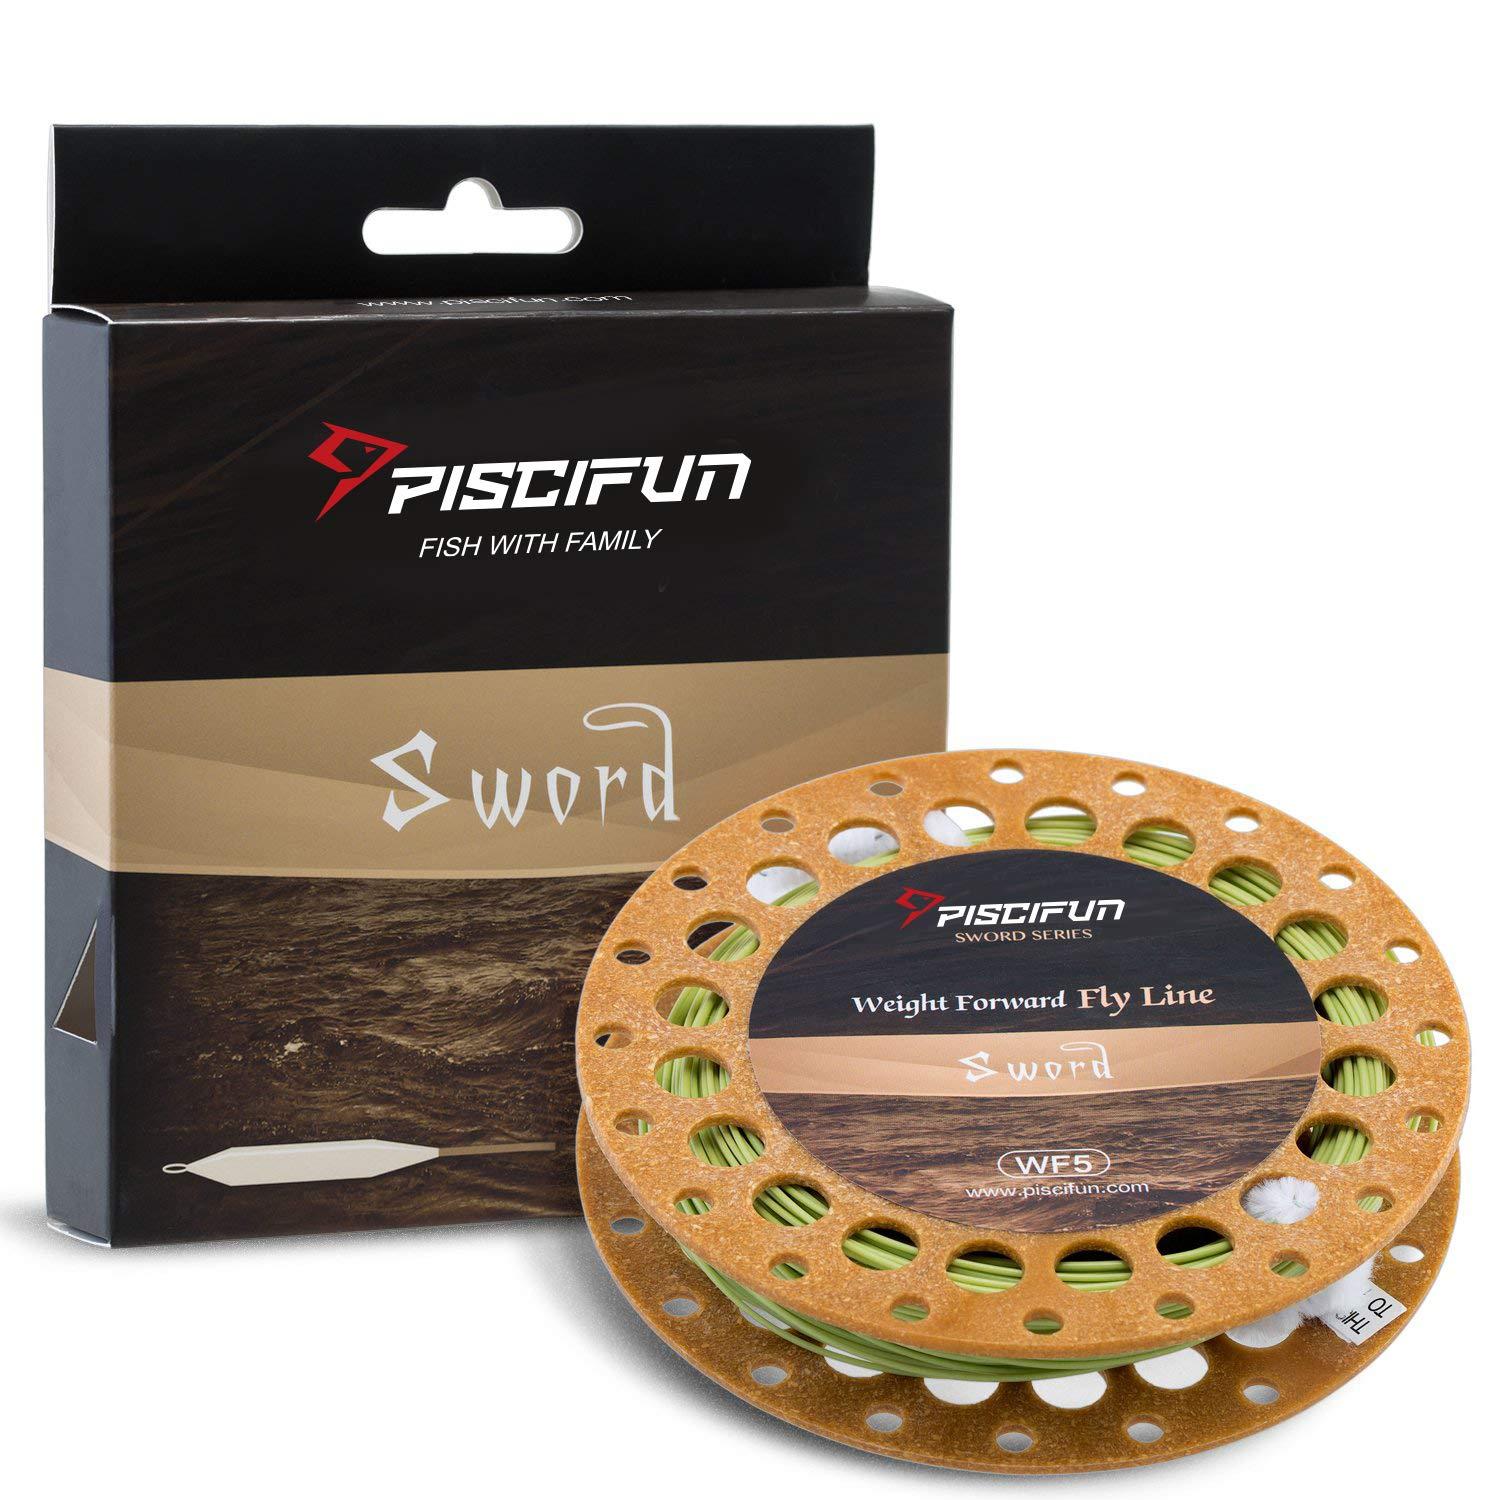 Piscifun Sword 5/6 wt Spare Spool of Space Gray Fly Fishing Reel